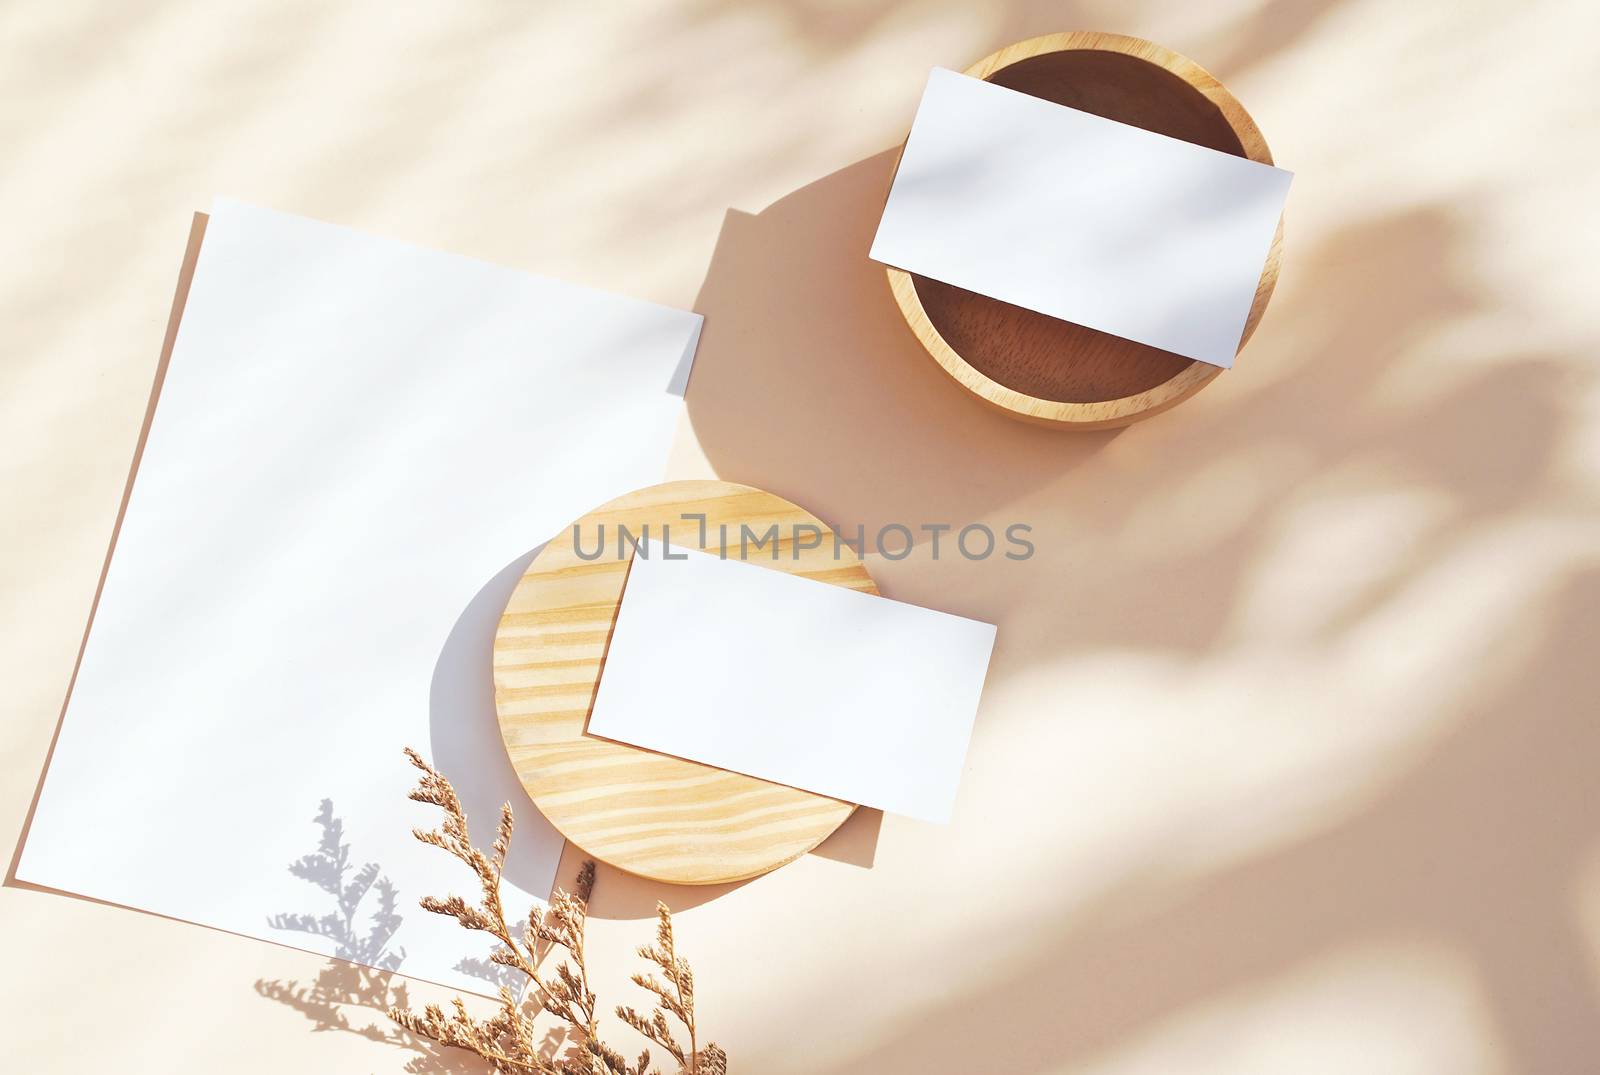 Flat lay of branding identity business name card on yellow background with flower and wooden container, light and shadow shape leaves, minimal concept for design